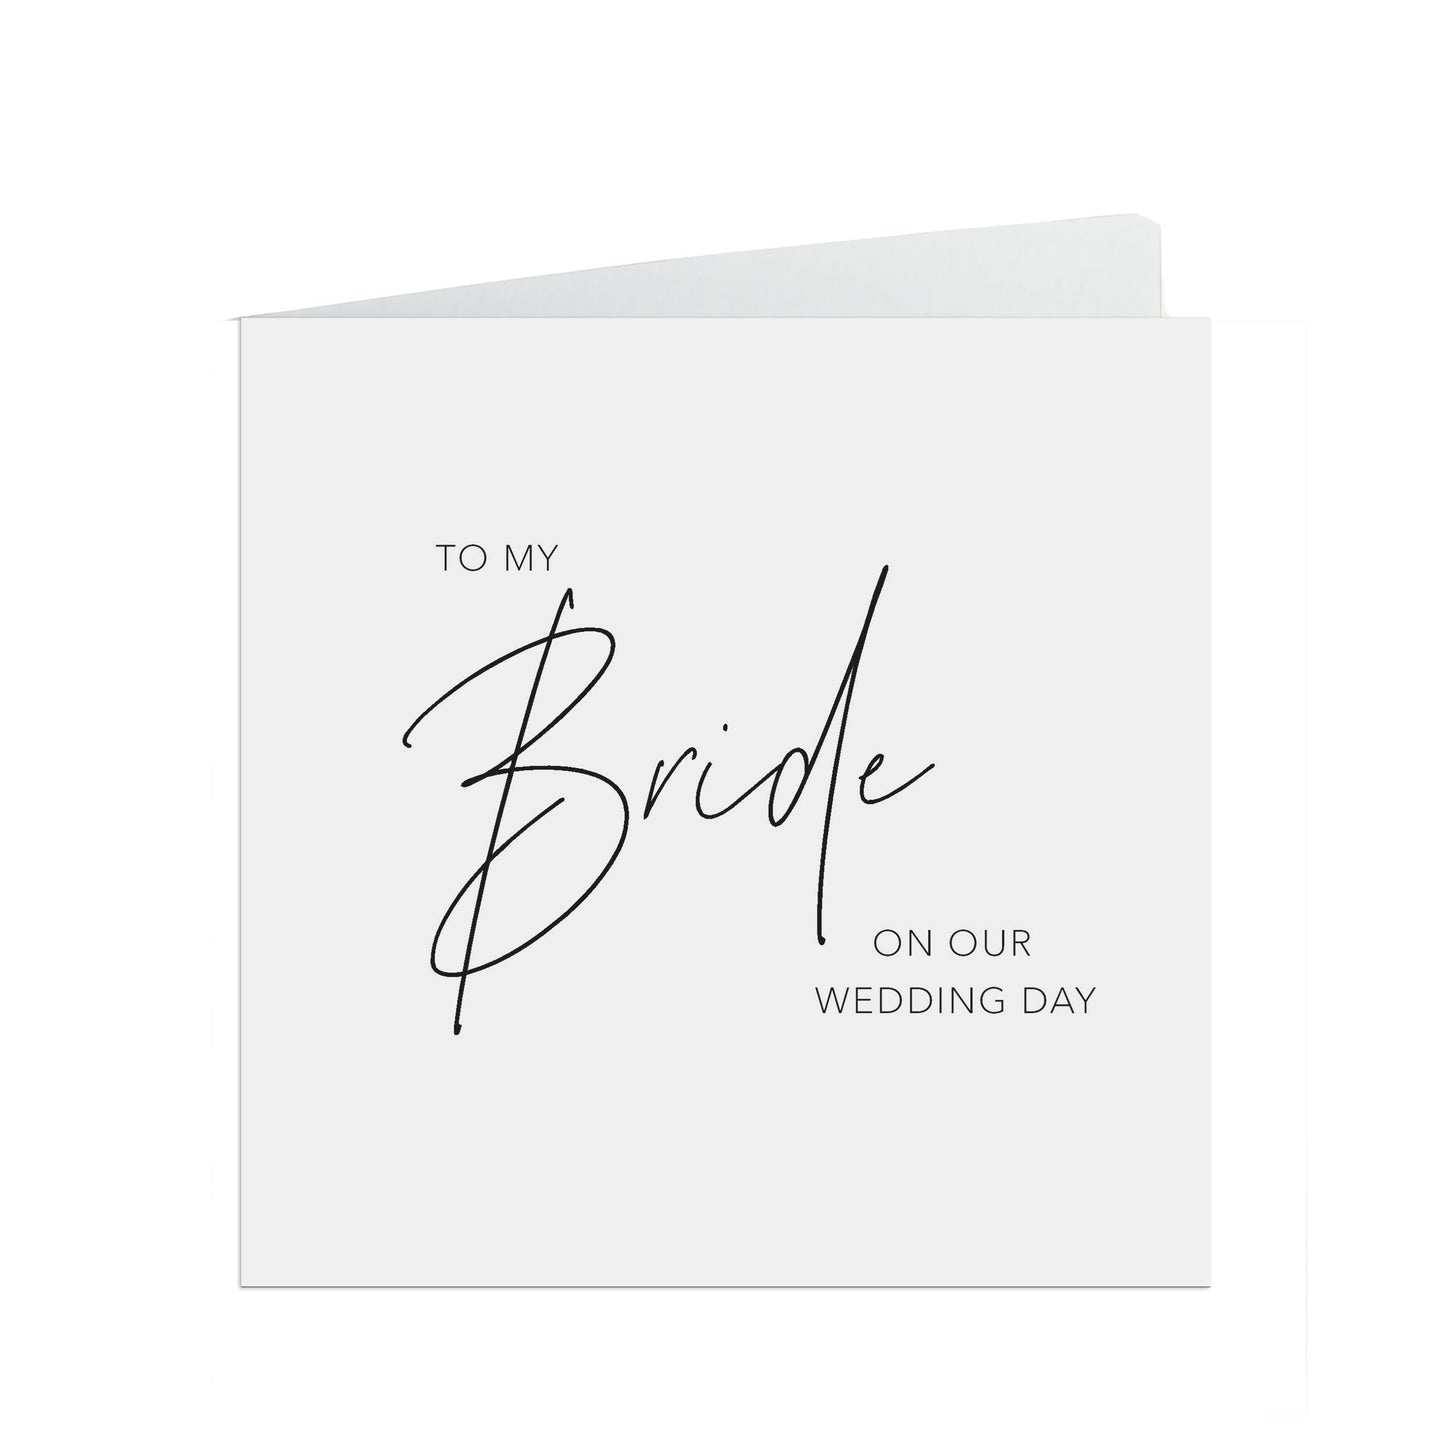 My Bride On Our Wedding Day Card, Elegant Black & White Design, 6x6 Inches In Size With A White Envelope.